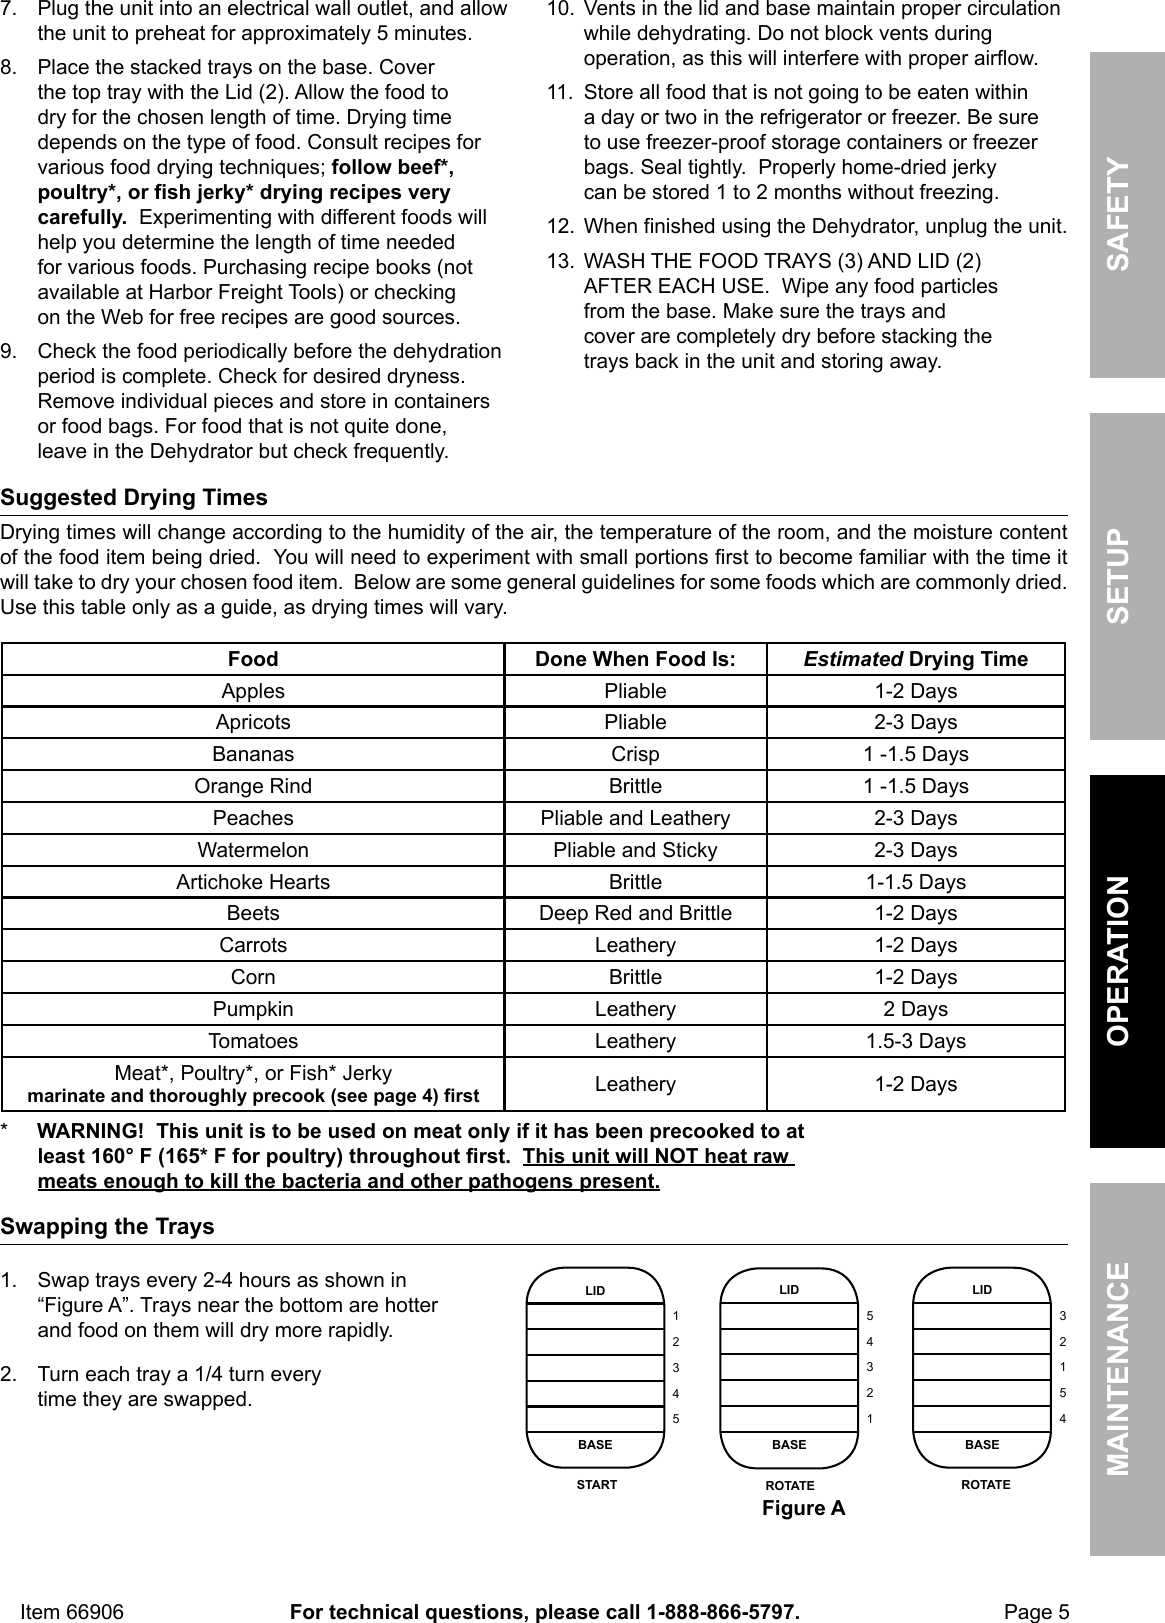 Page 5 of 8 - Harbor-Freight Harbor-Freight-5-Tier-Food-Dehydrator-Product-Manual-  Harbor-freight-5-tier-food-dehydrator-product-manual